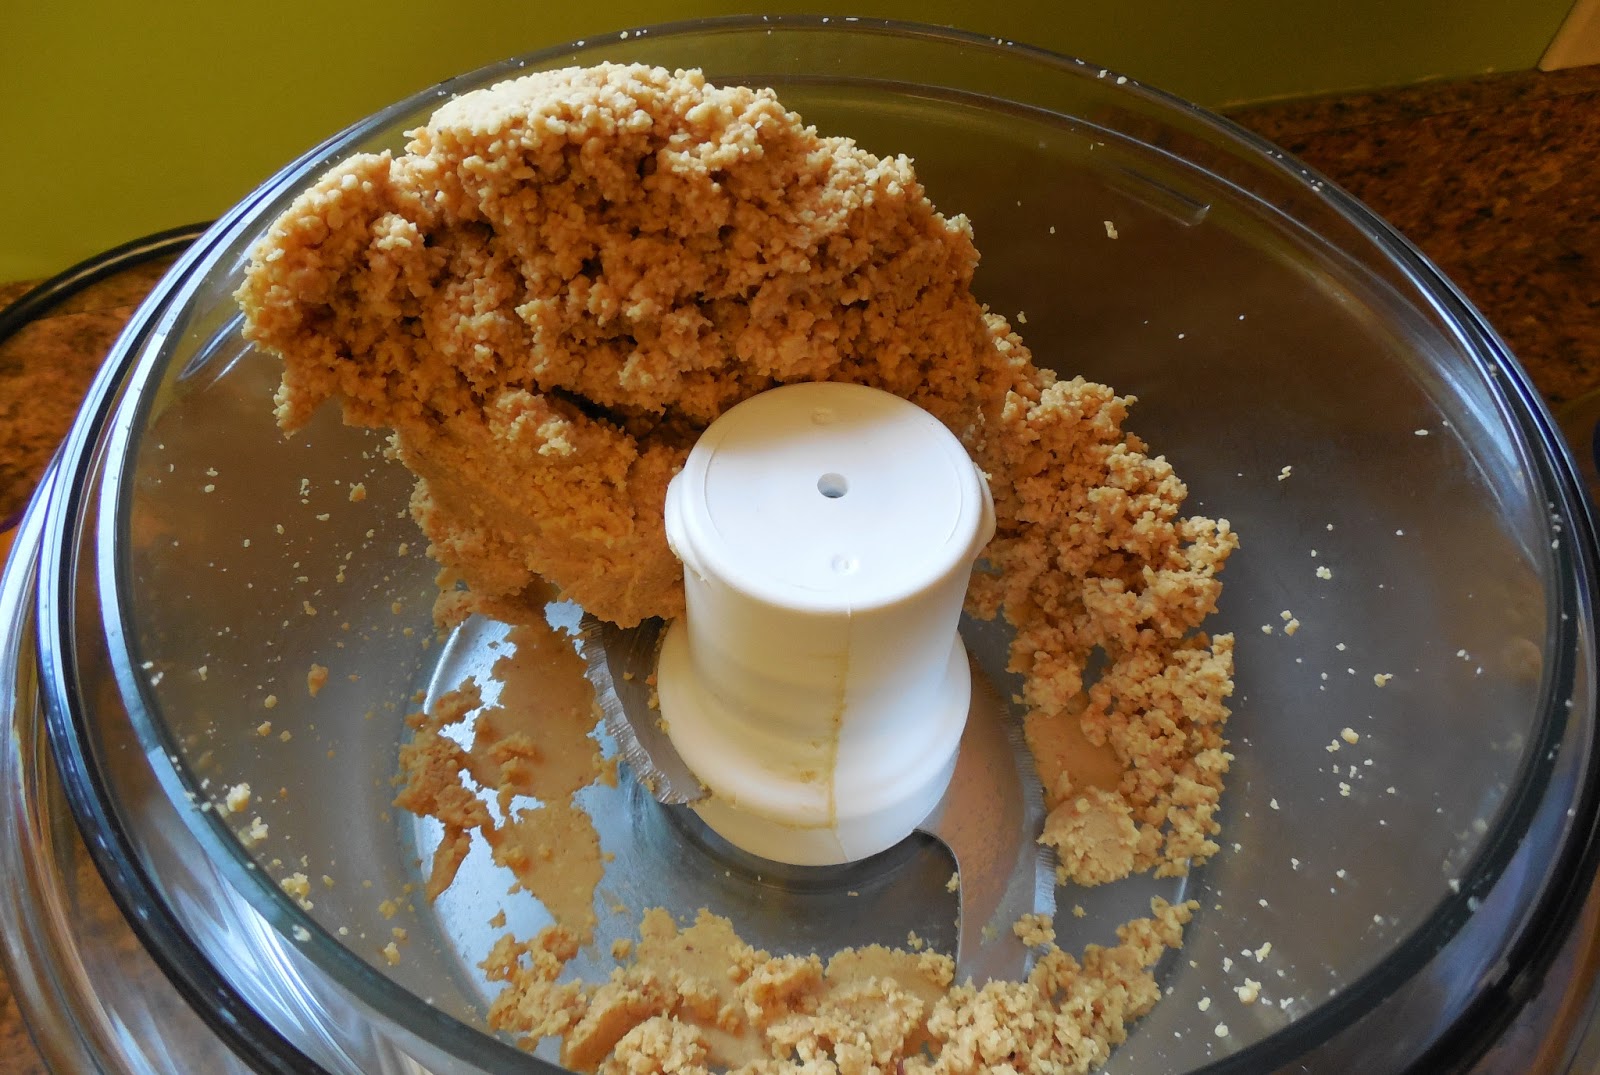 How To Make Peanut Butter In A Food Processor